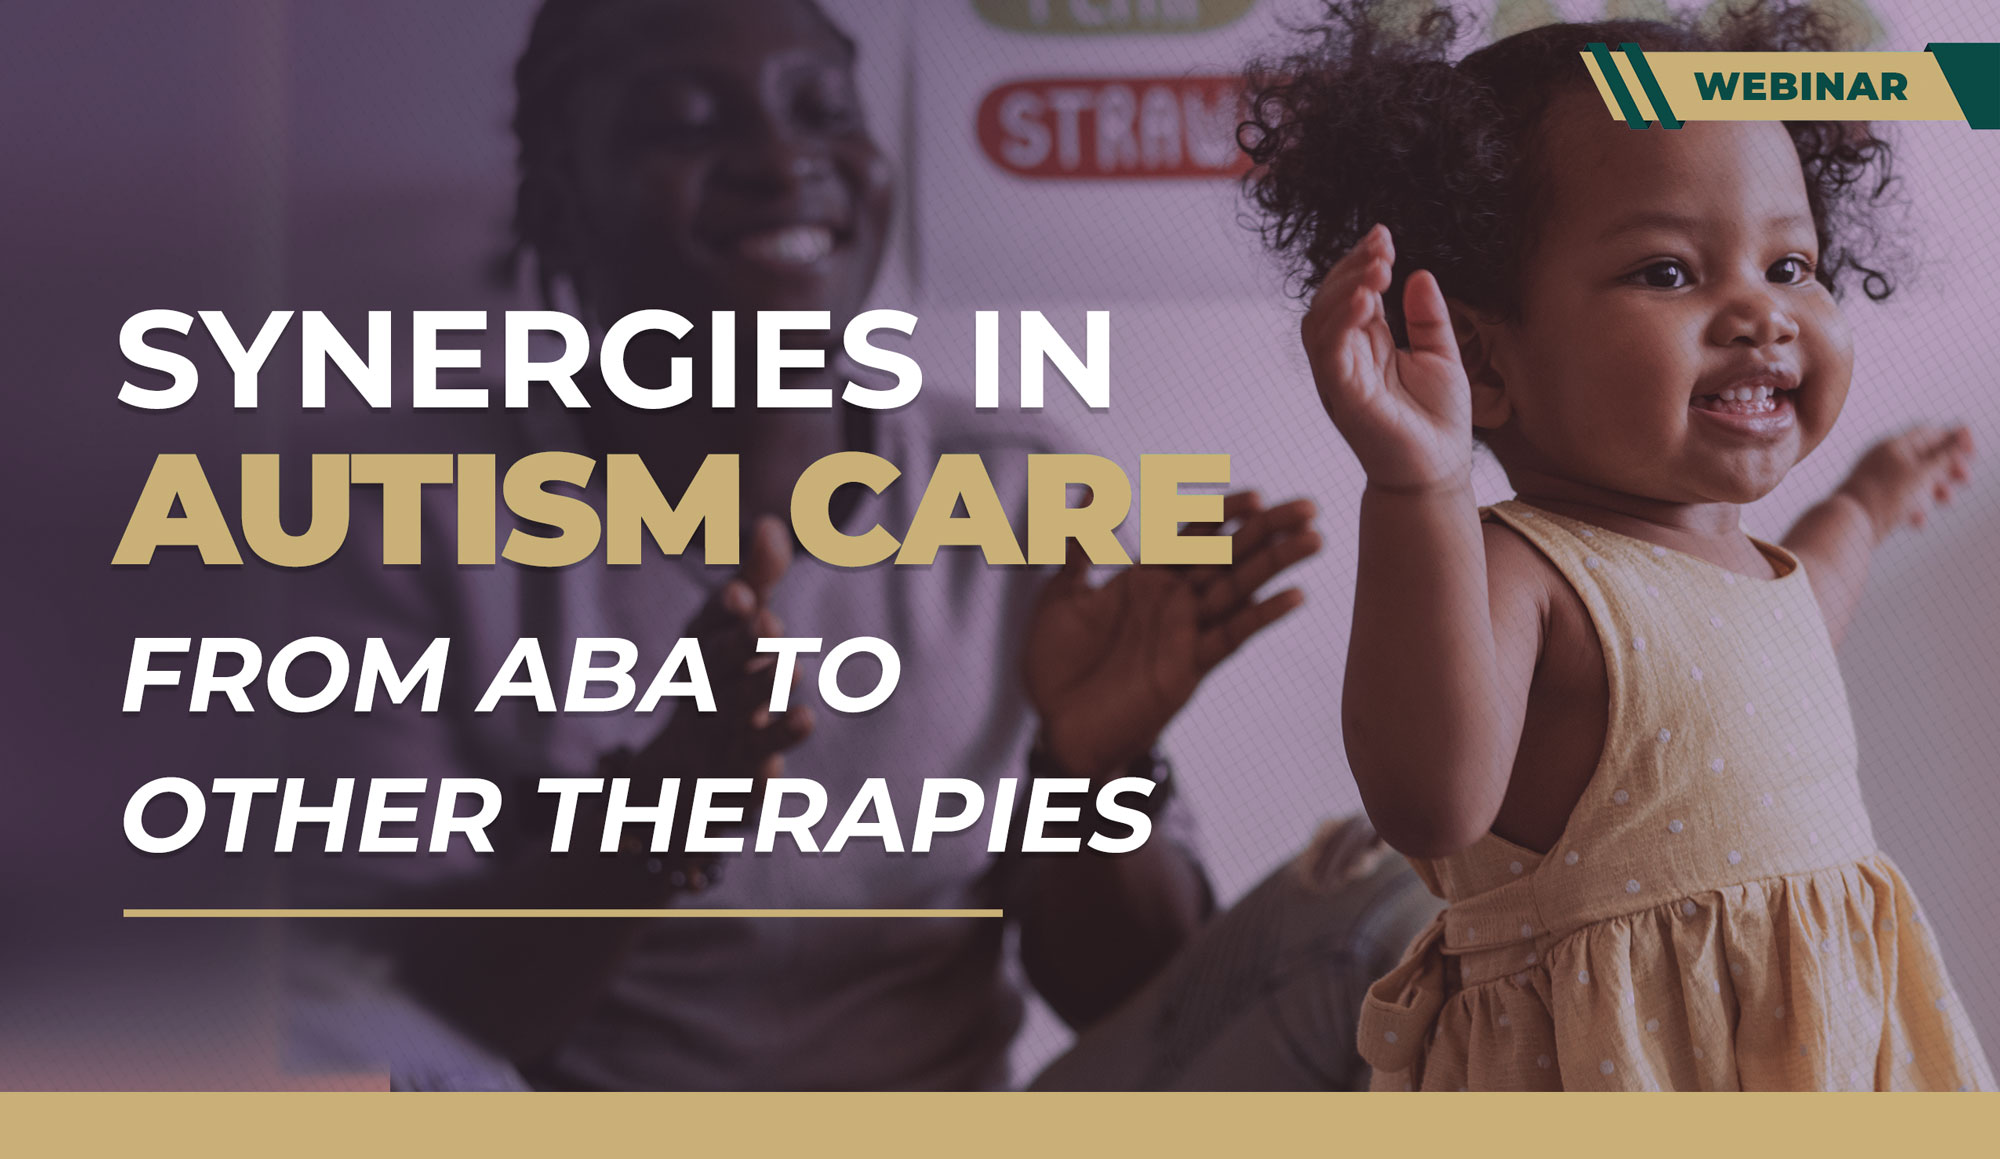 Synergies in Autism Care: From ABA to Other Therapies